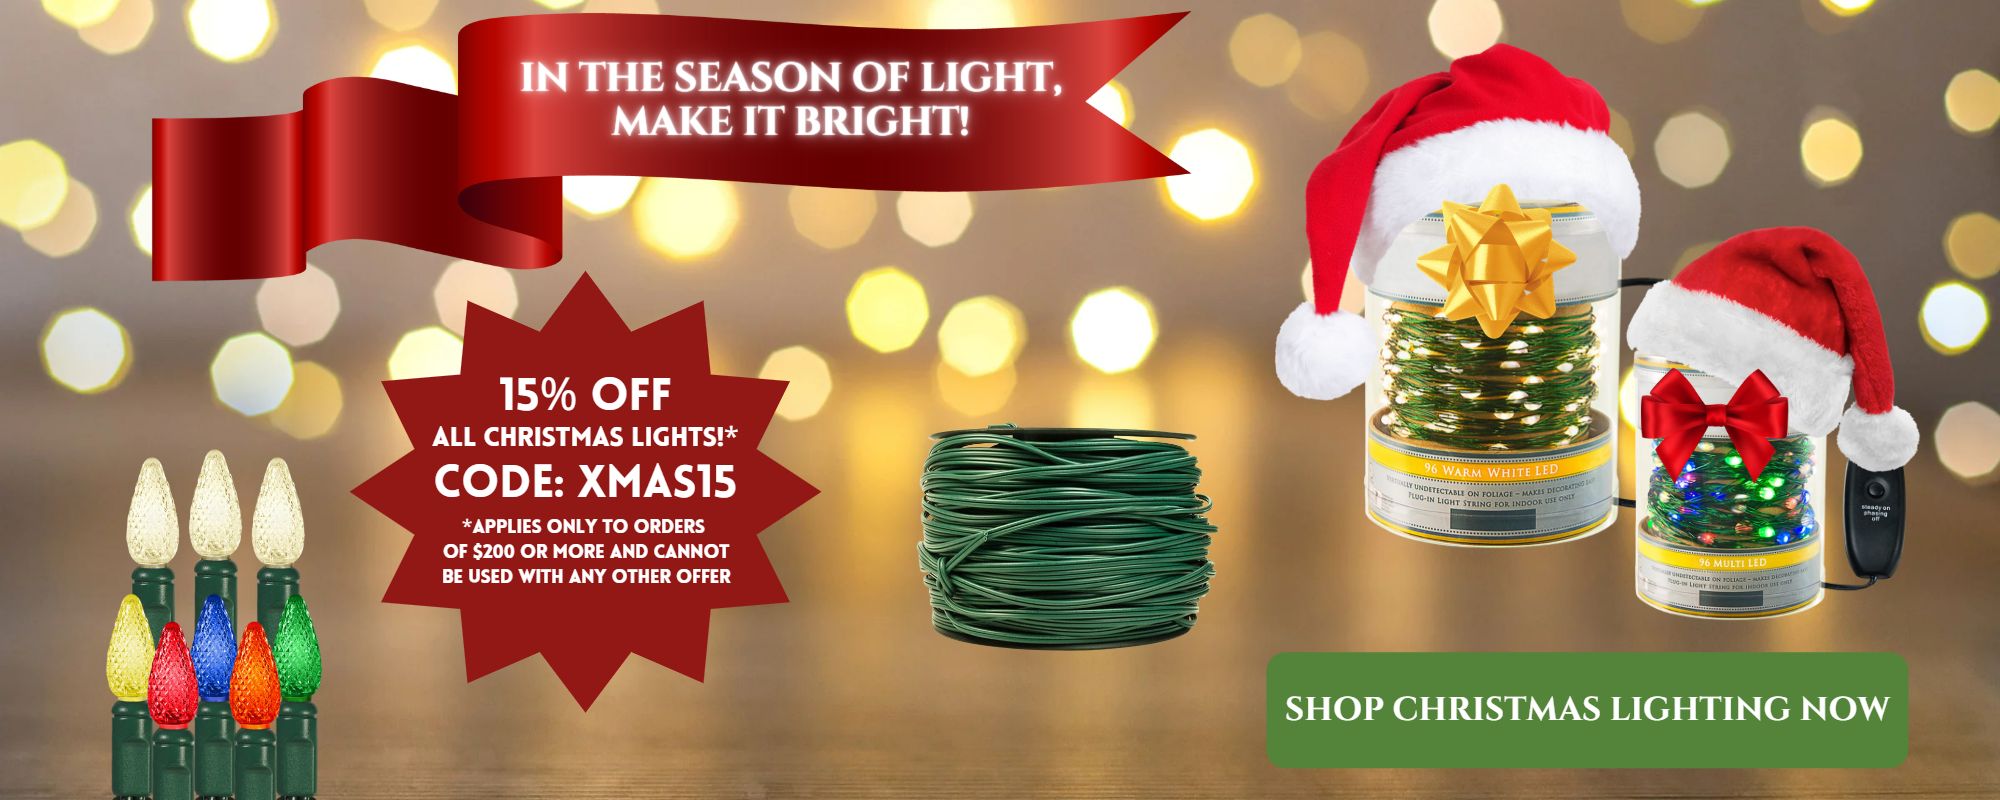 In the season of light, make it bright! Shop Christmas lights now.